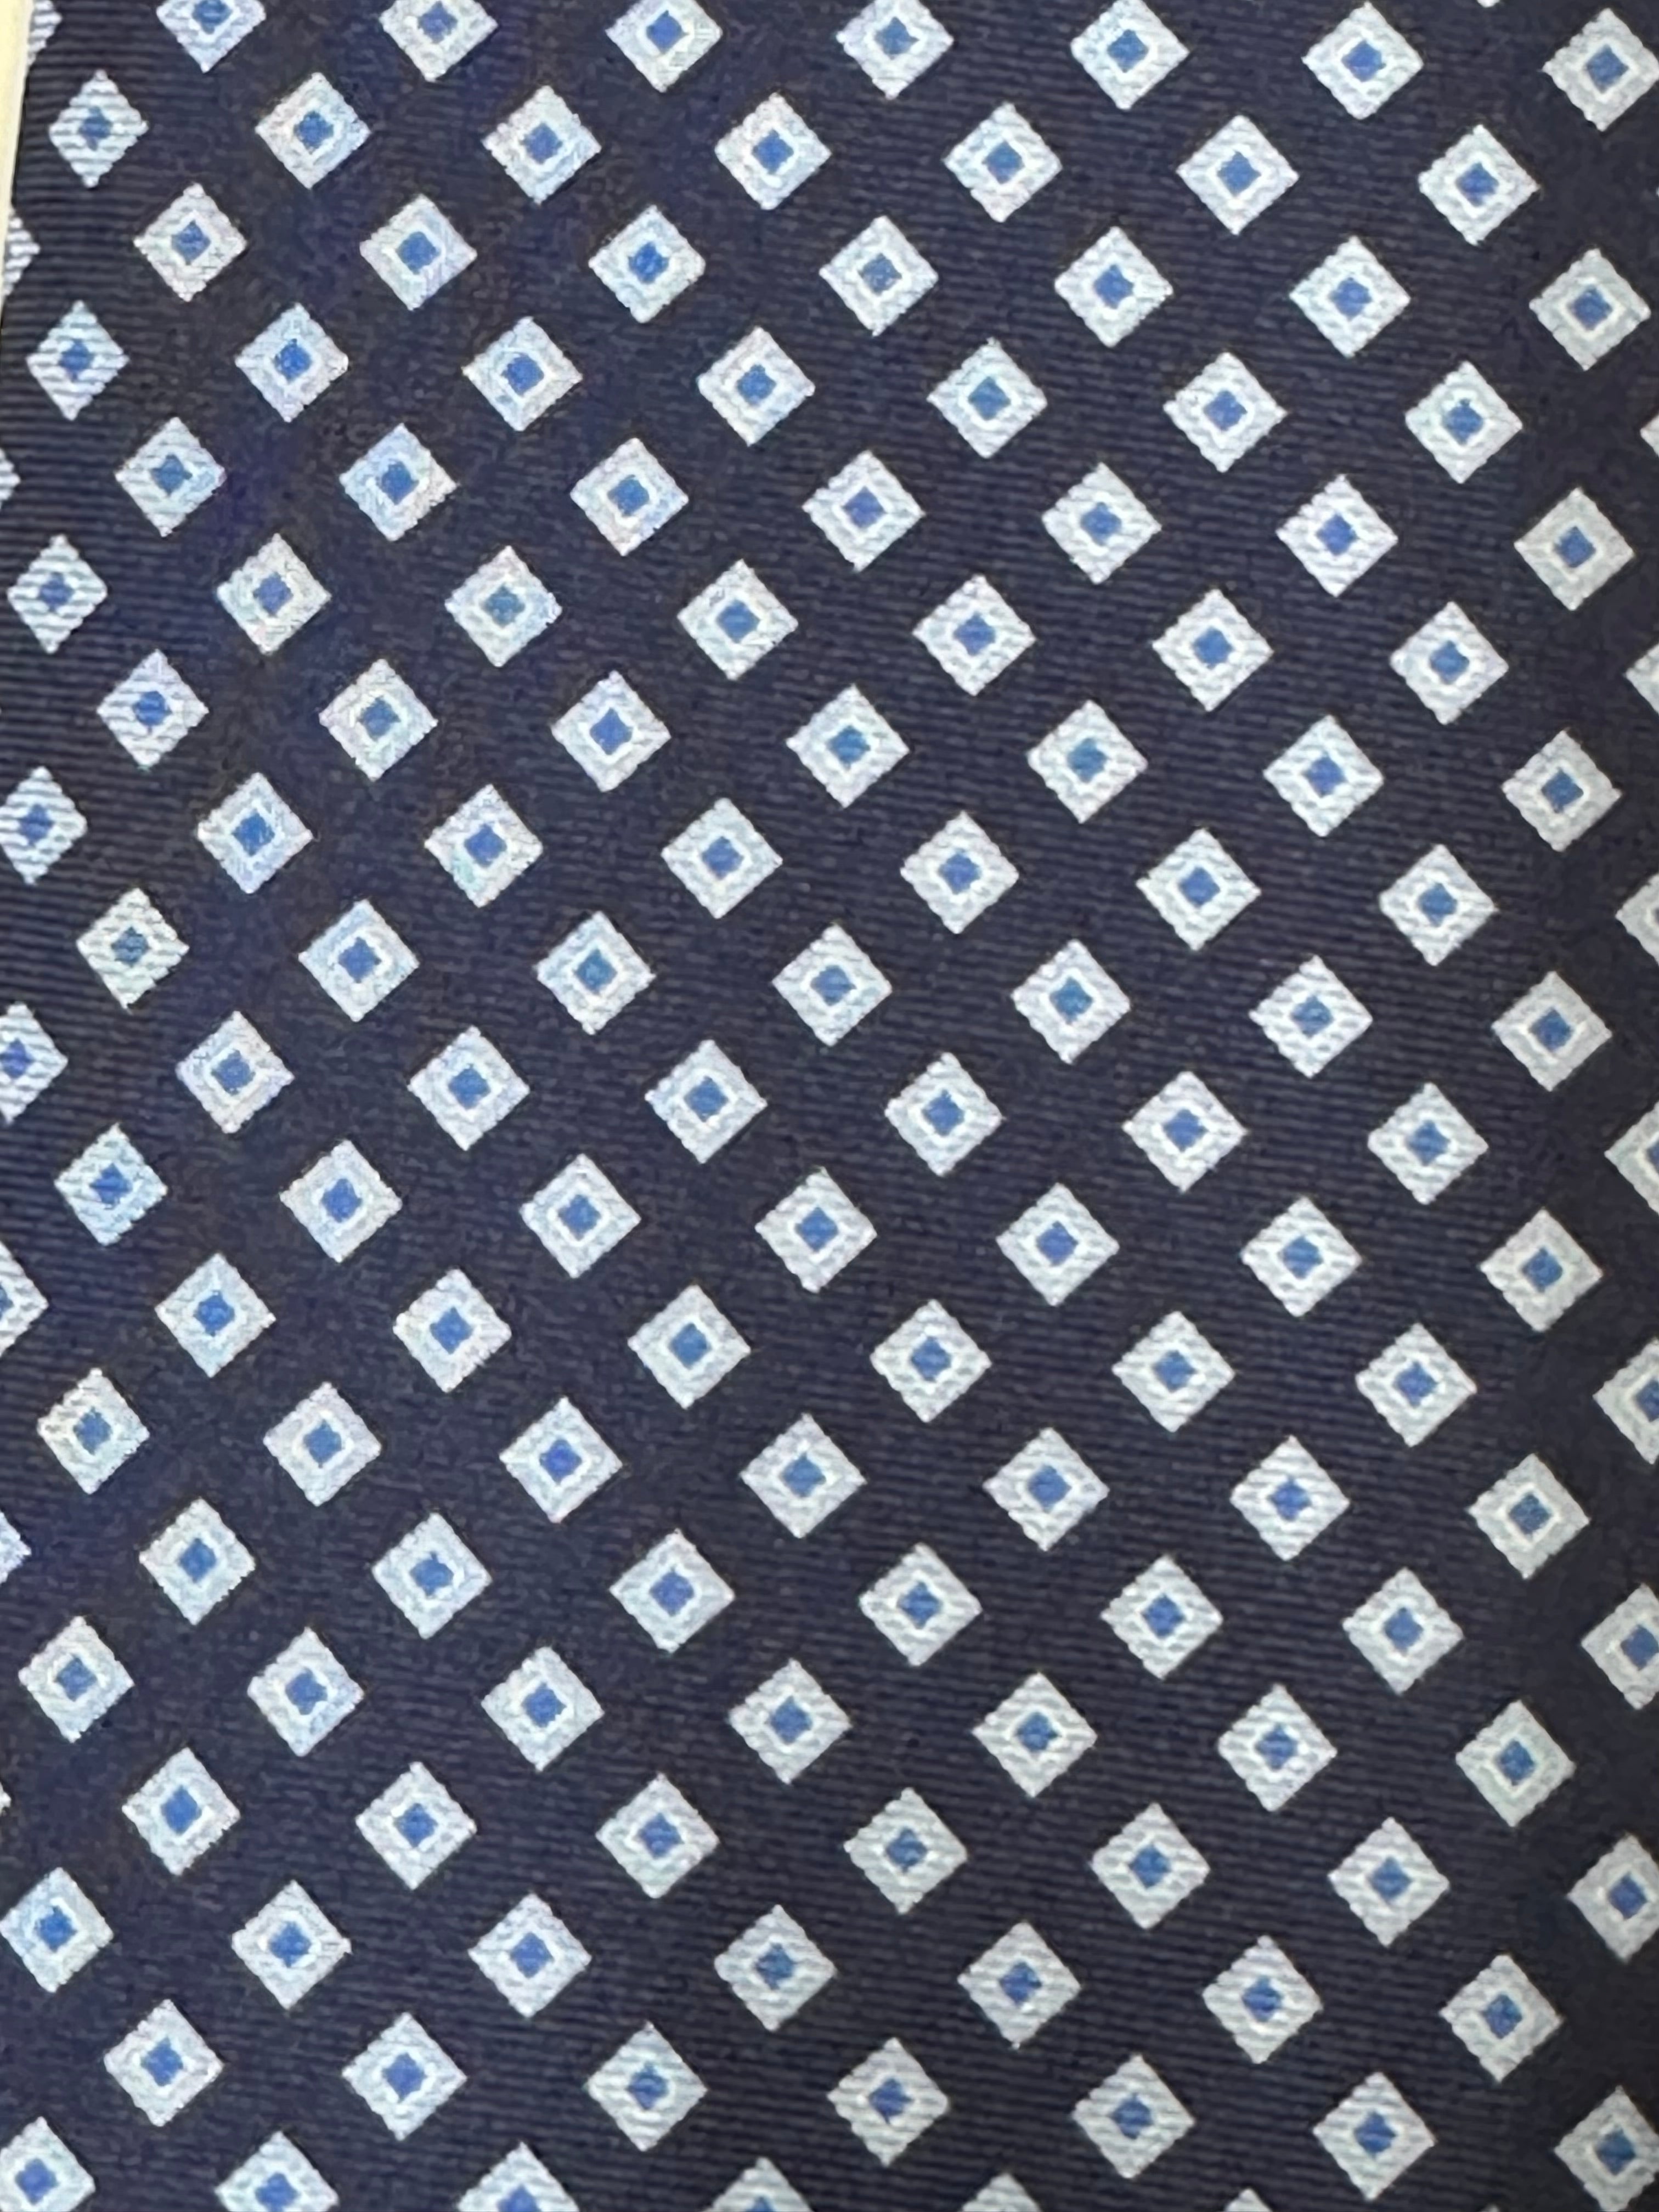 Royal and Blue Square Tie